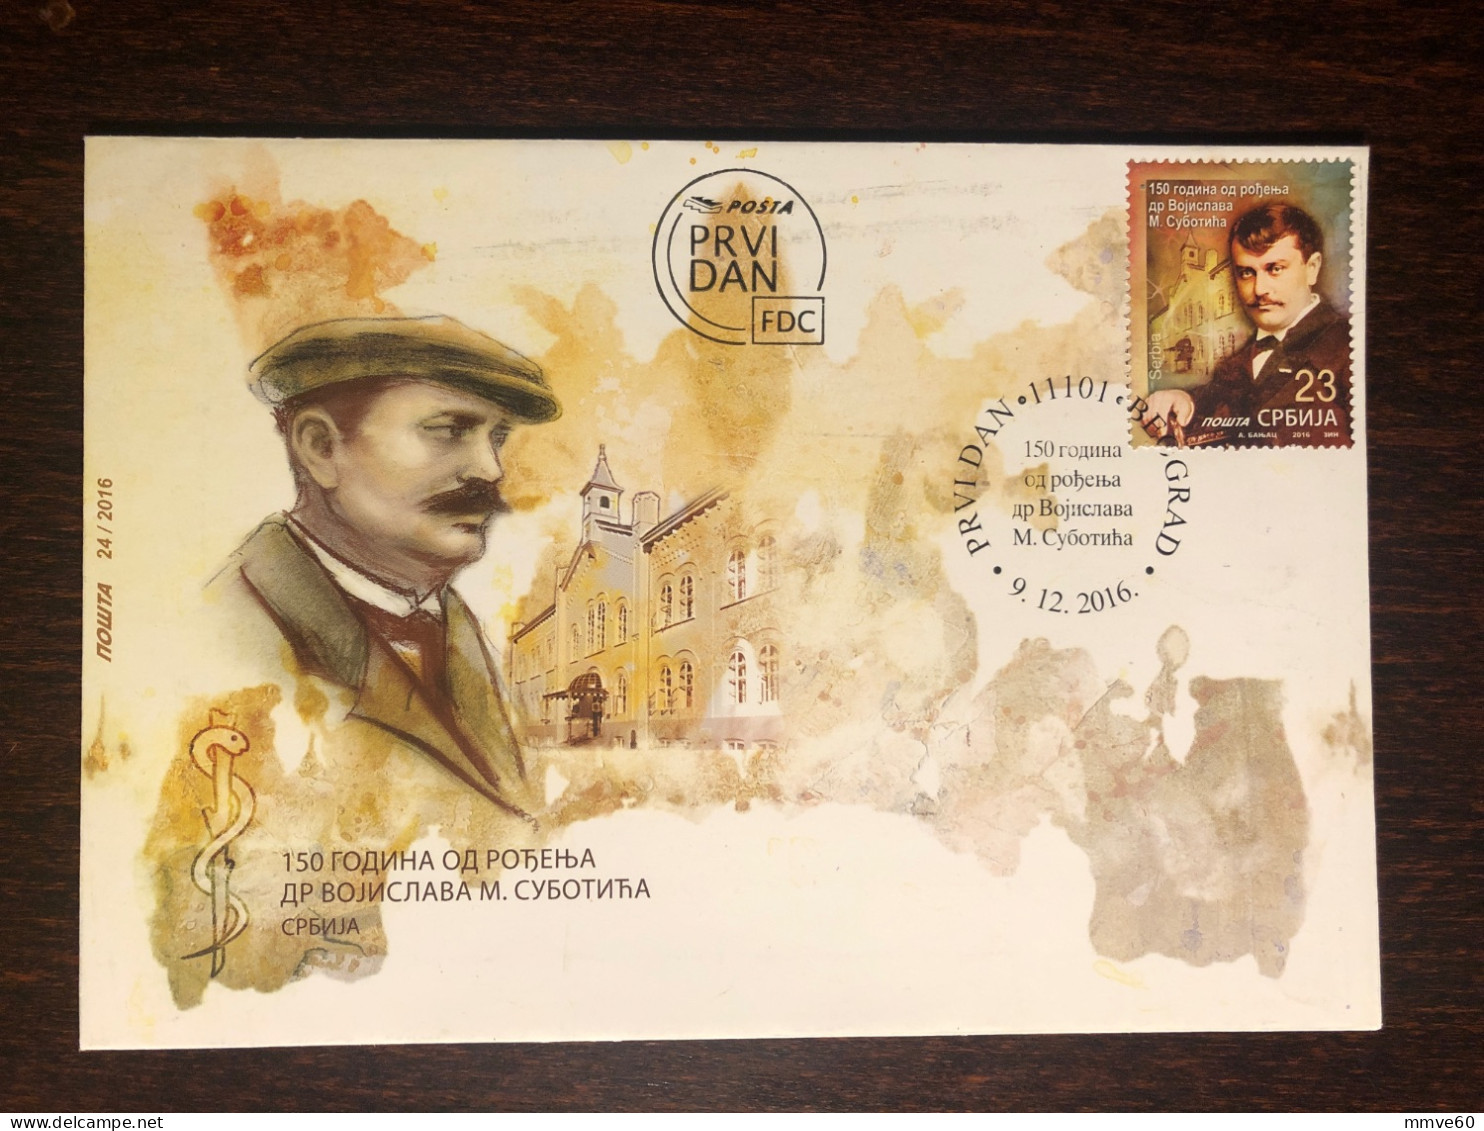 SERBIA FDC COVER 2016 YEAR DOCTOR SUBOTITSYA SURGERY HEALTH MEDICINE STAMPS - Serbien